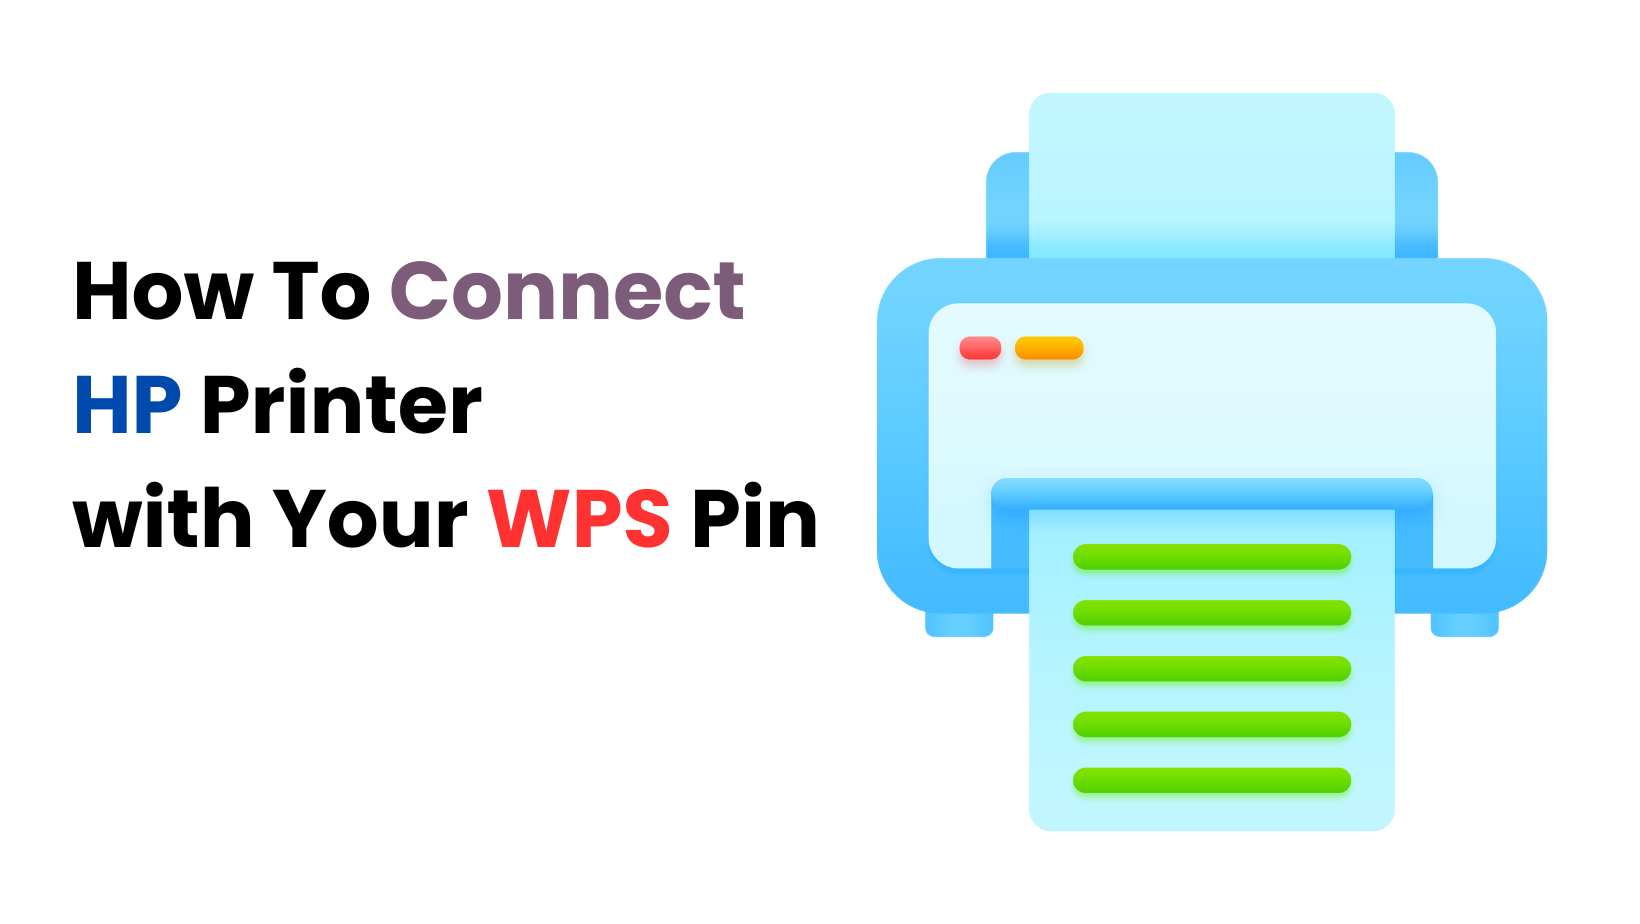 HP Printer WPS Pin: A Guide on How To Connect Your Printer